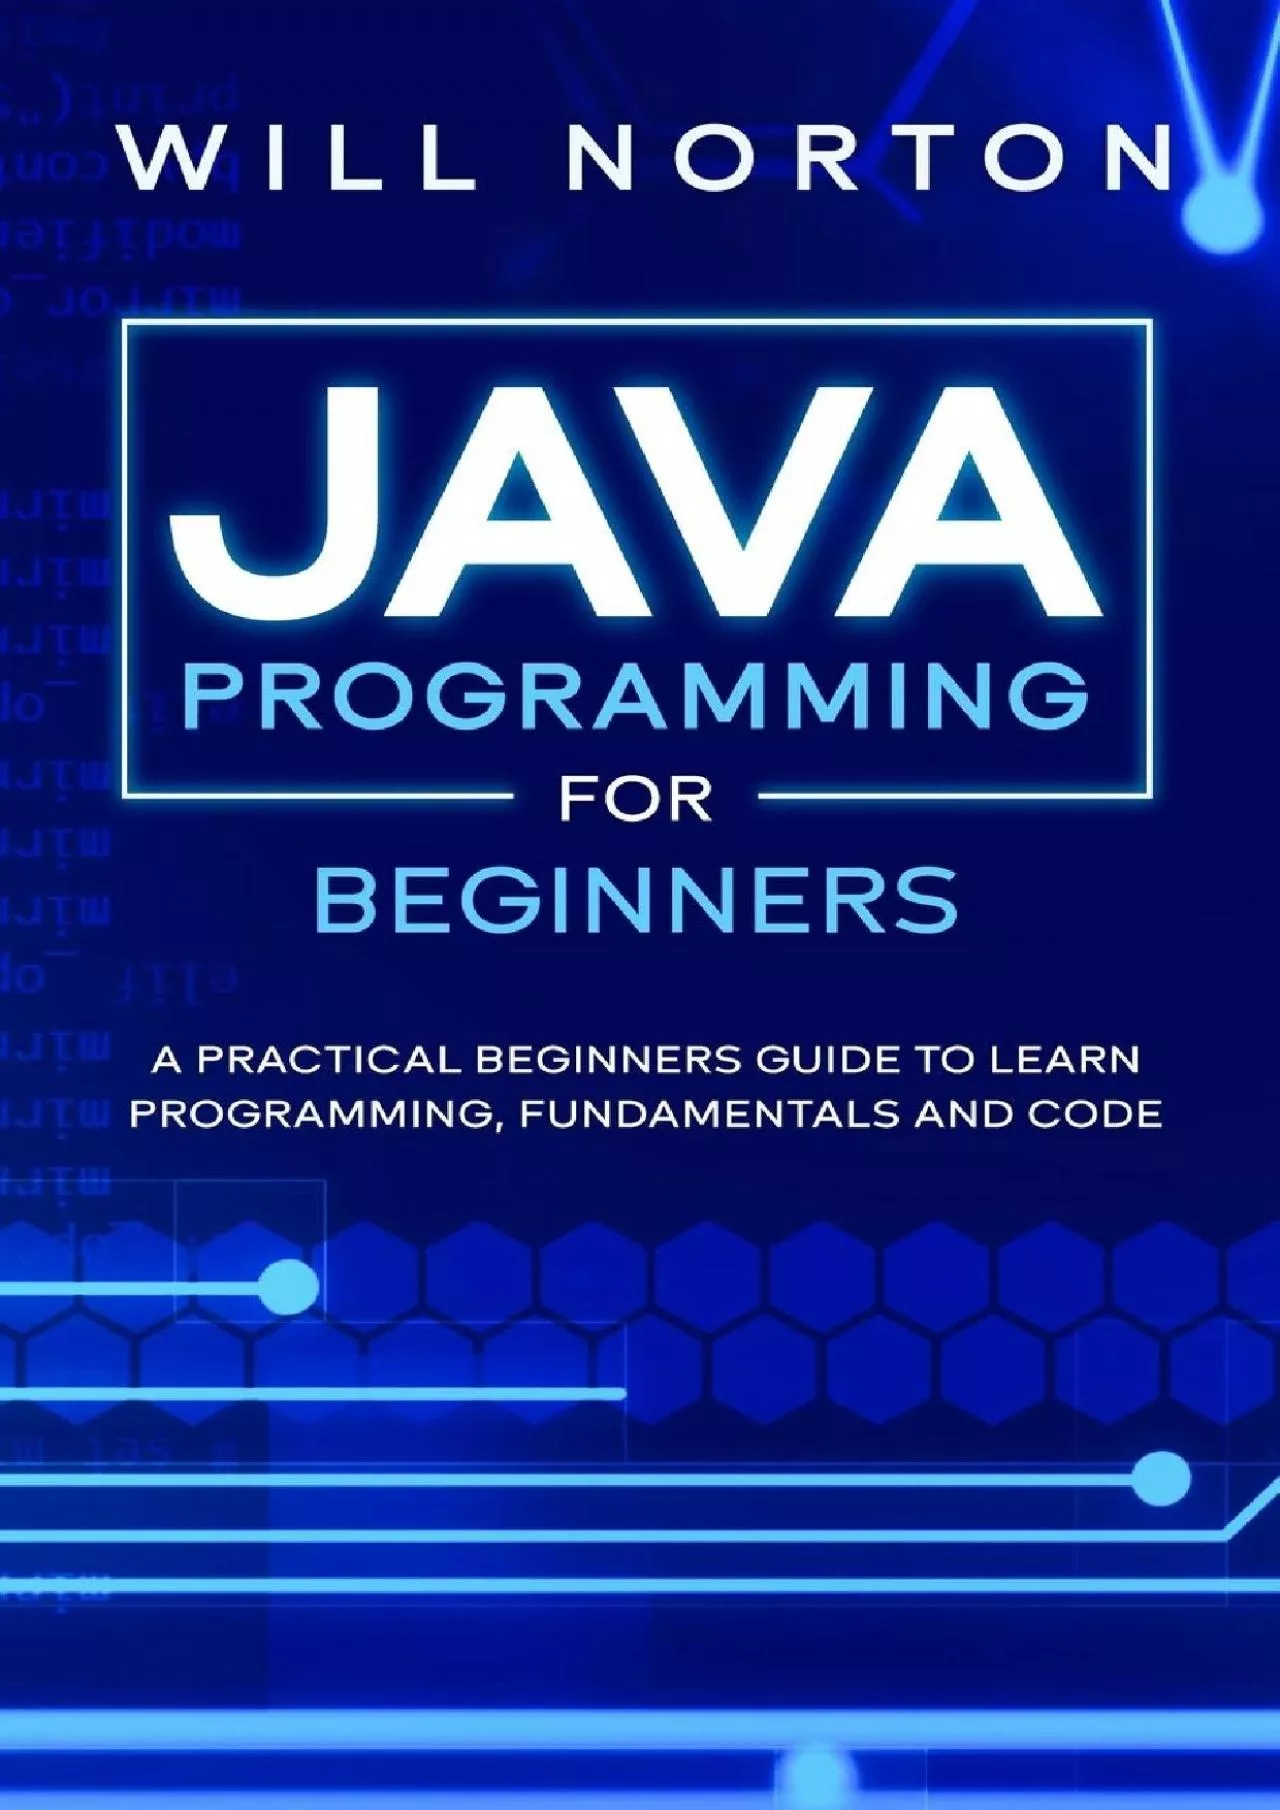 [READING BOOK]-Java Programming for beginners: A piratical beginners guide to learn programming,